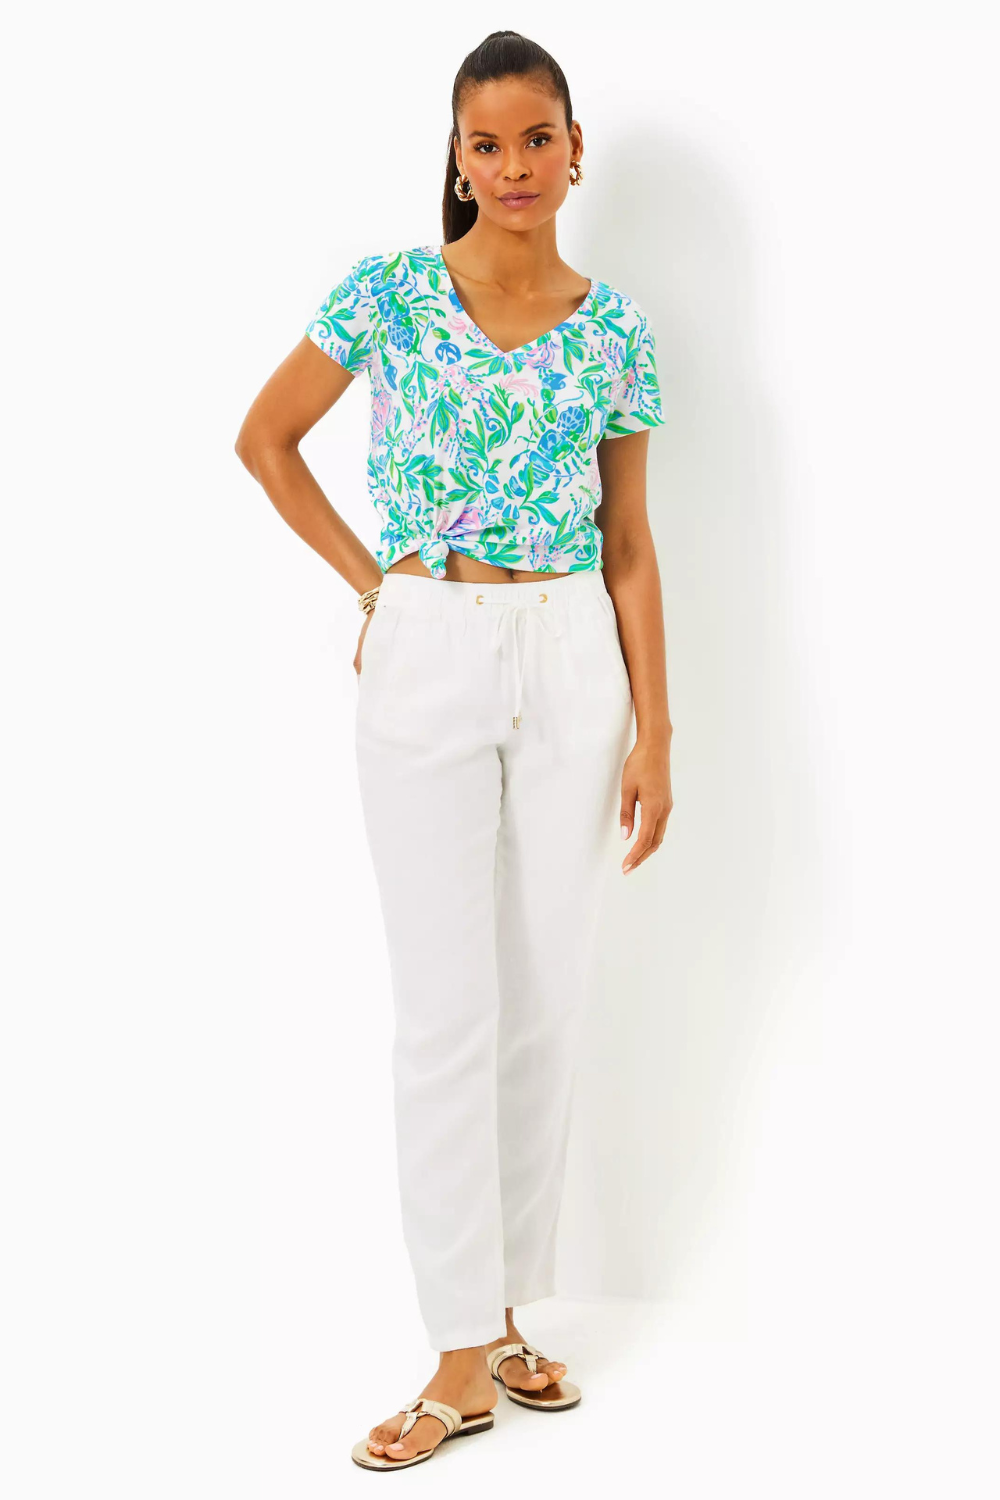 Lilly Pulitzer Meredith Tee - Just a Pinch